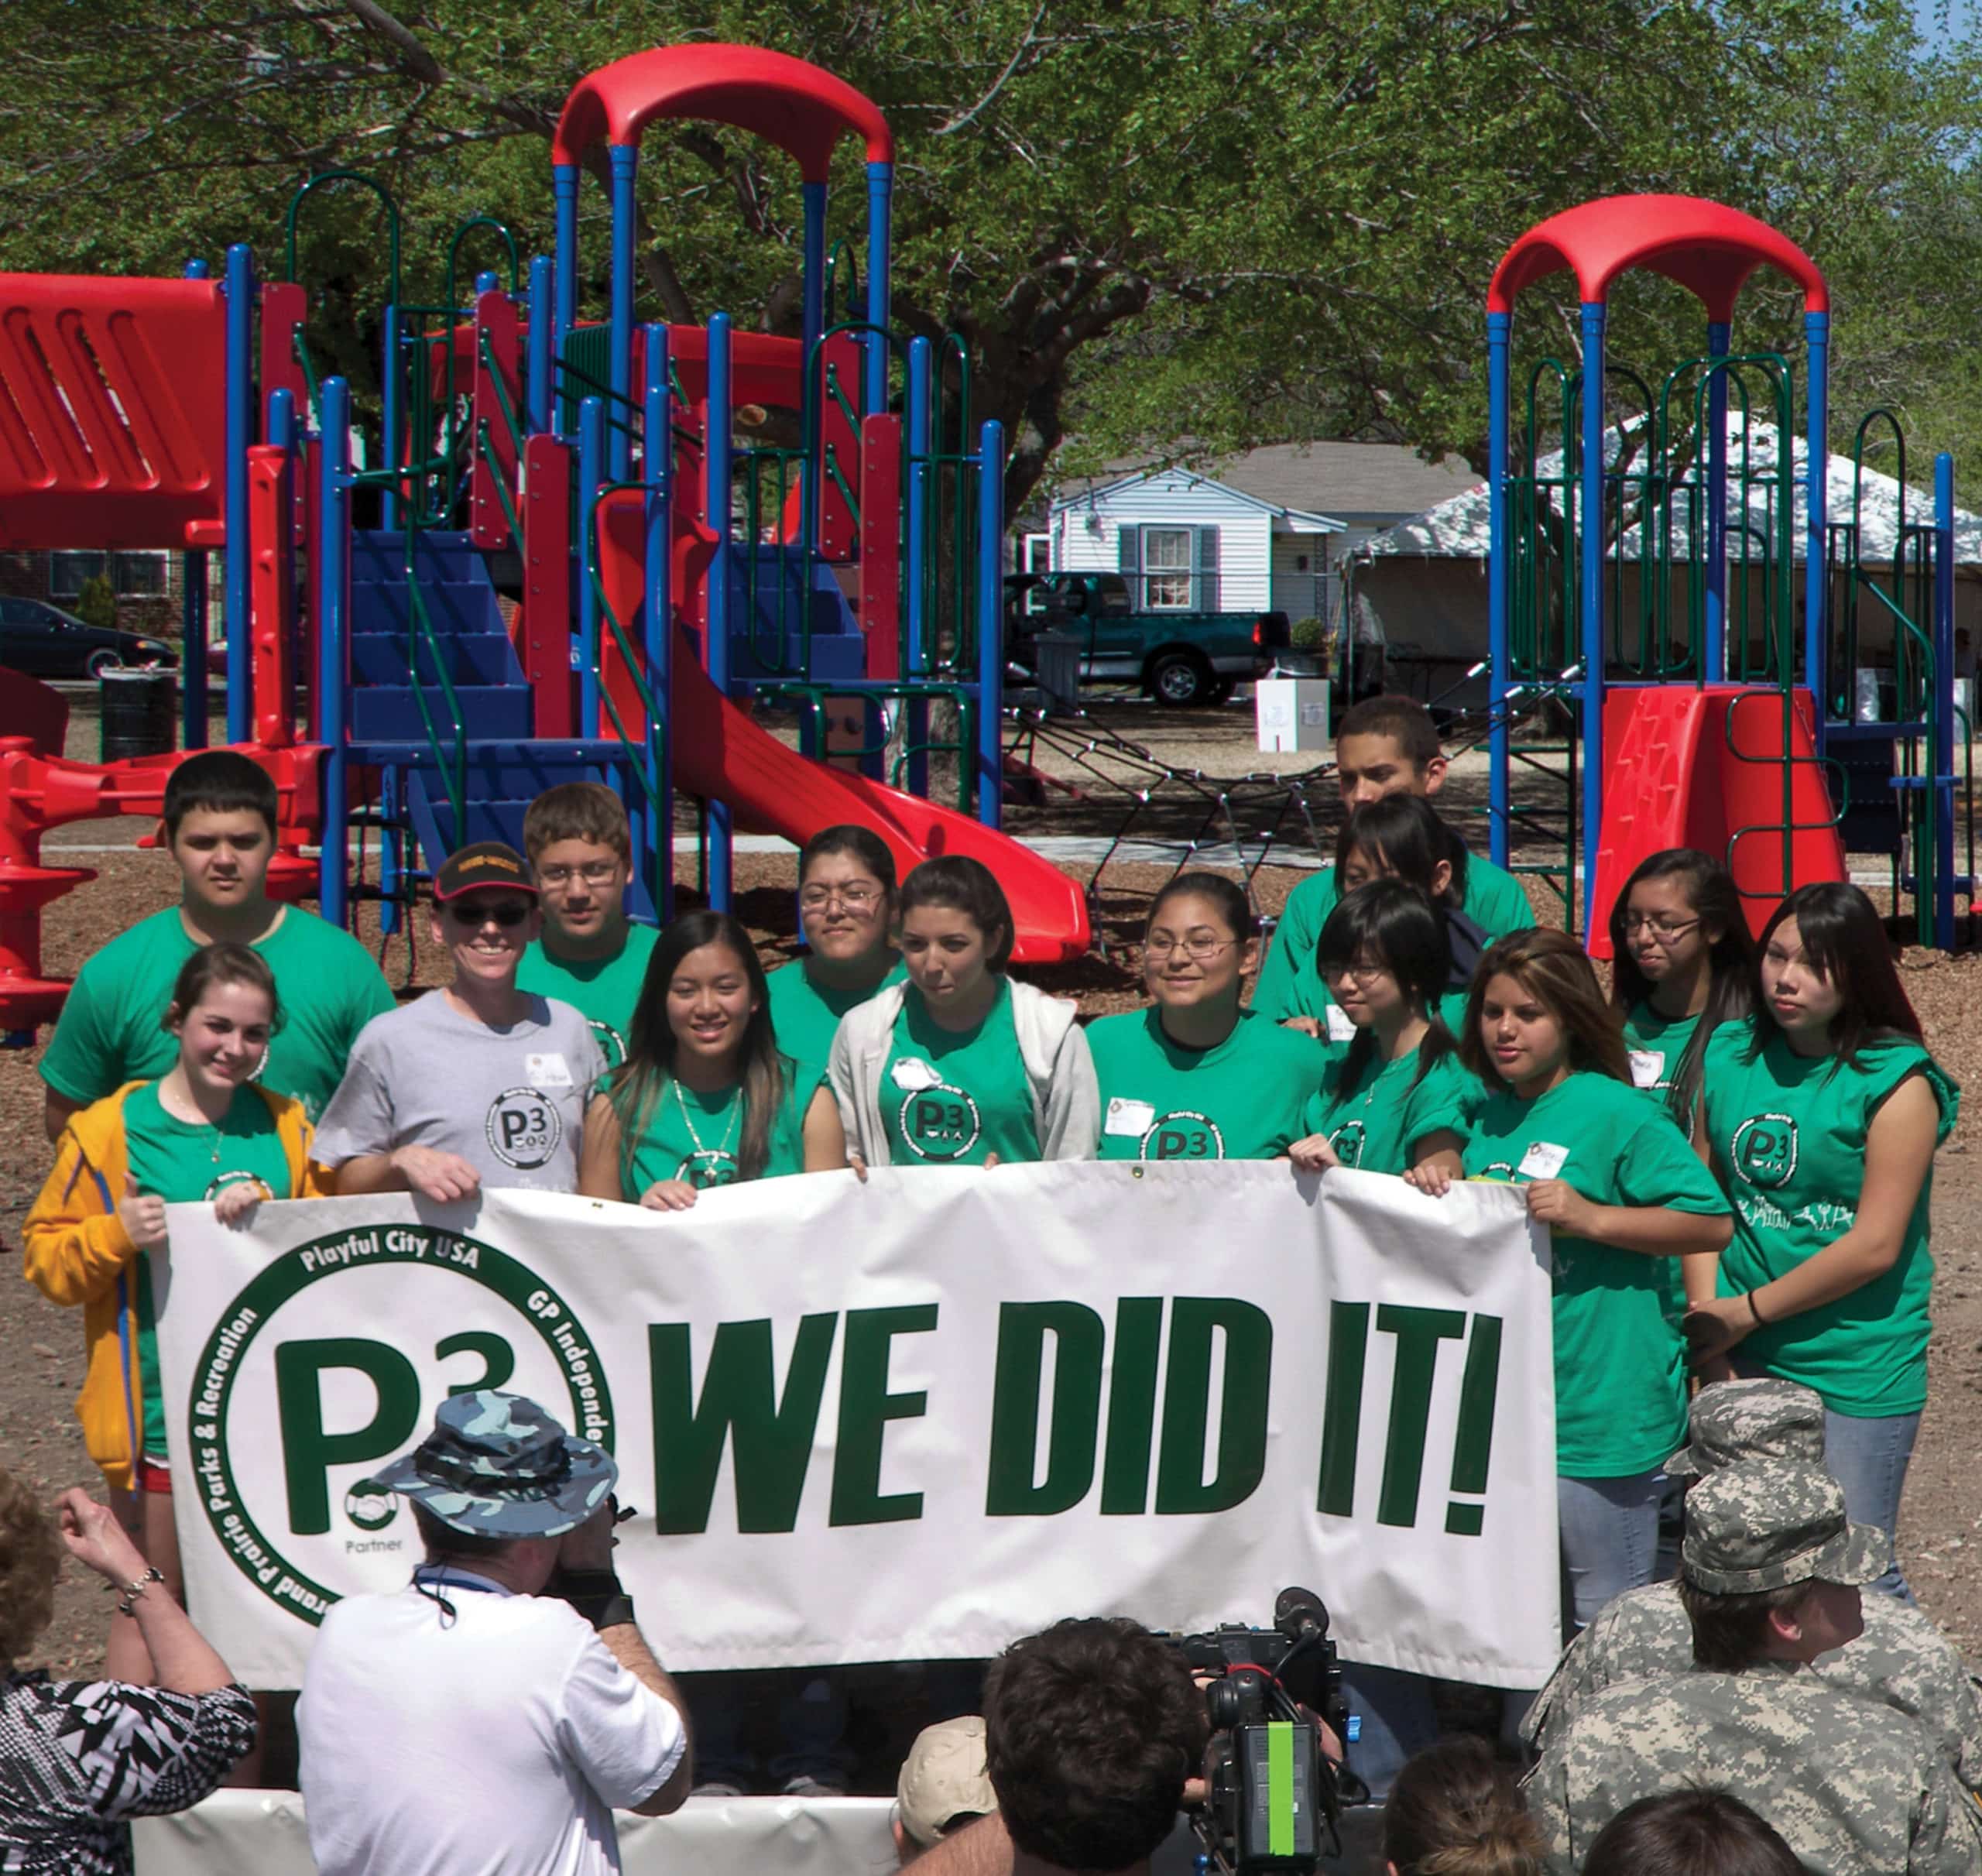 Several people wearing green shirts holding a banner that reads "P3 We Did It!" in front of an outdoor playground and a crowd